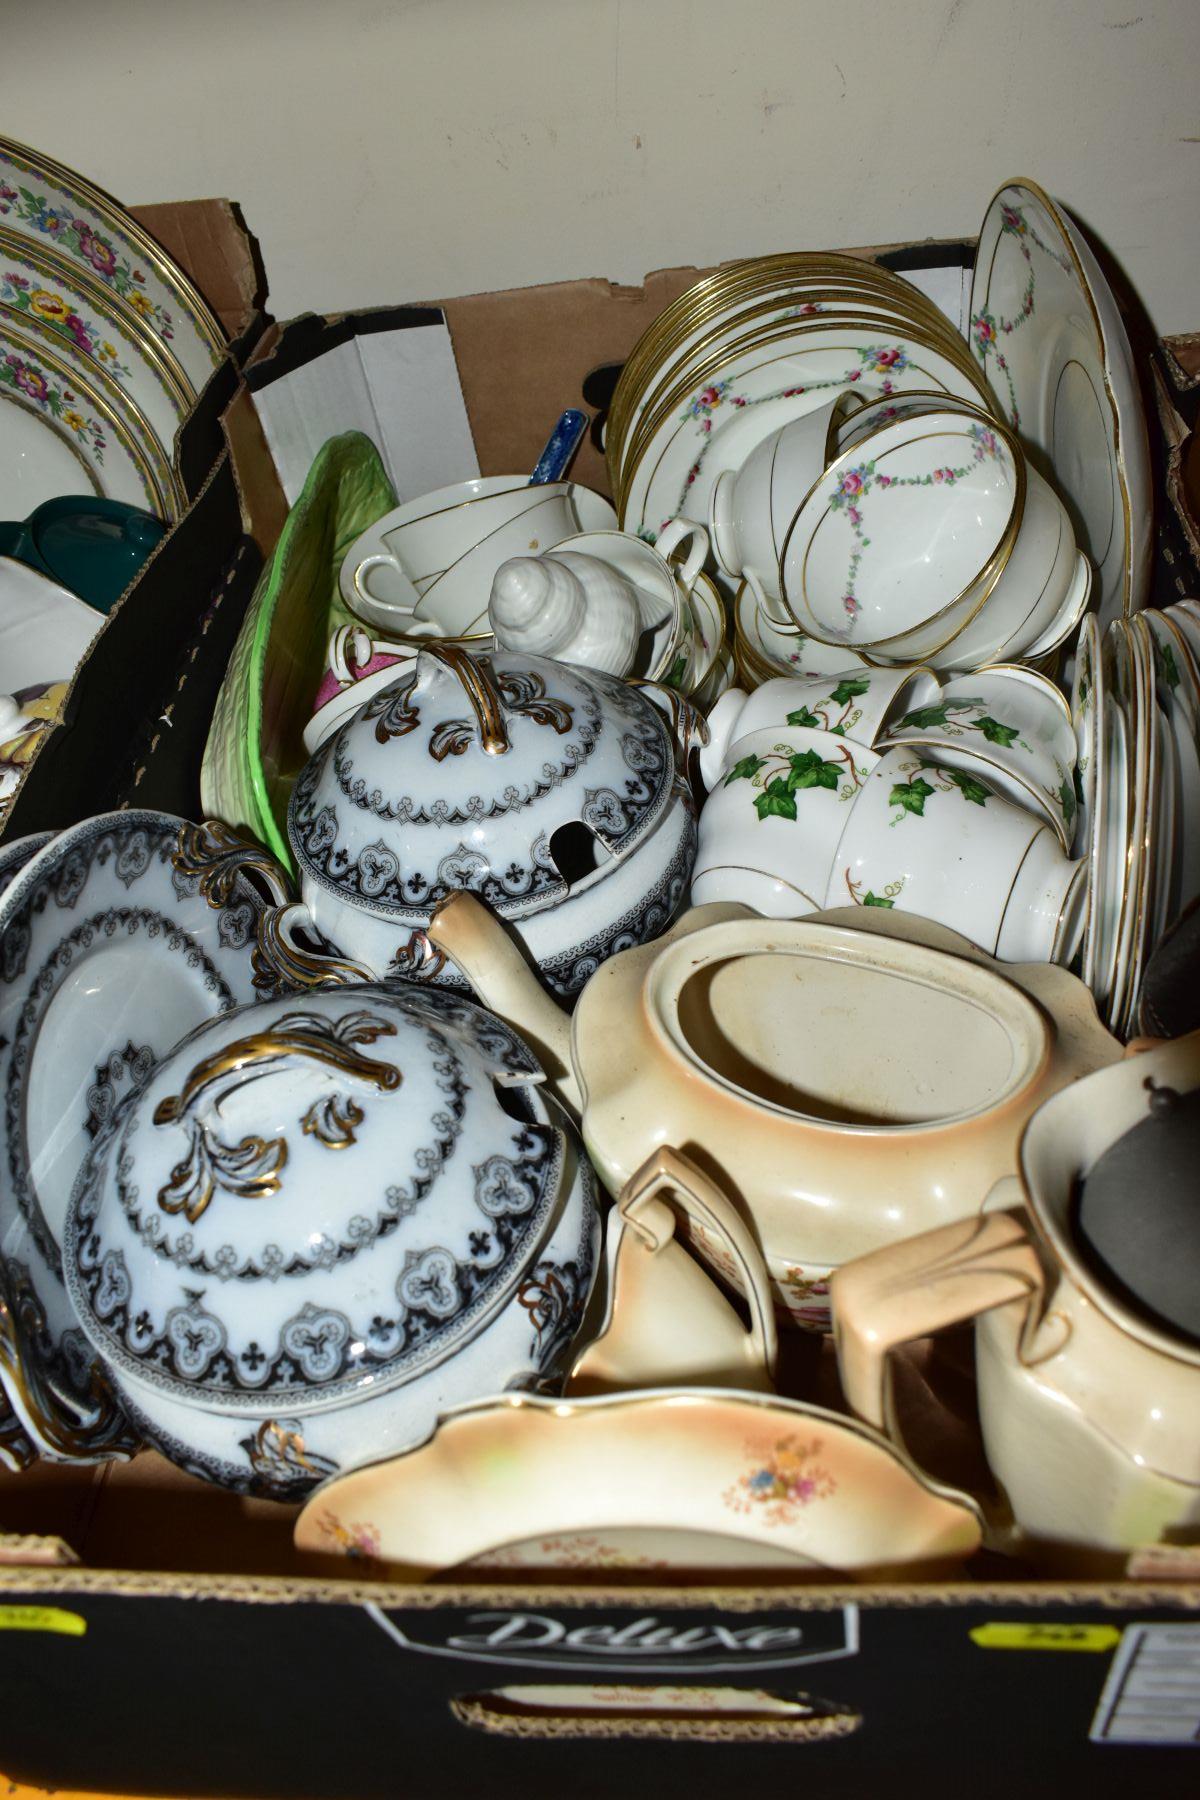 A COLLECTION OF CERAMICS, DRINKING GLASSES AND METALWARE, including a Sadler white chamber pot, - Image 6 of 8